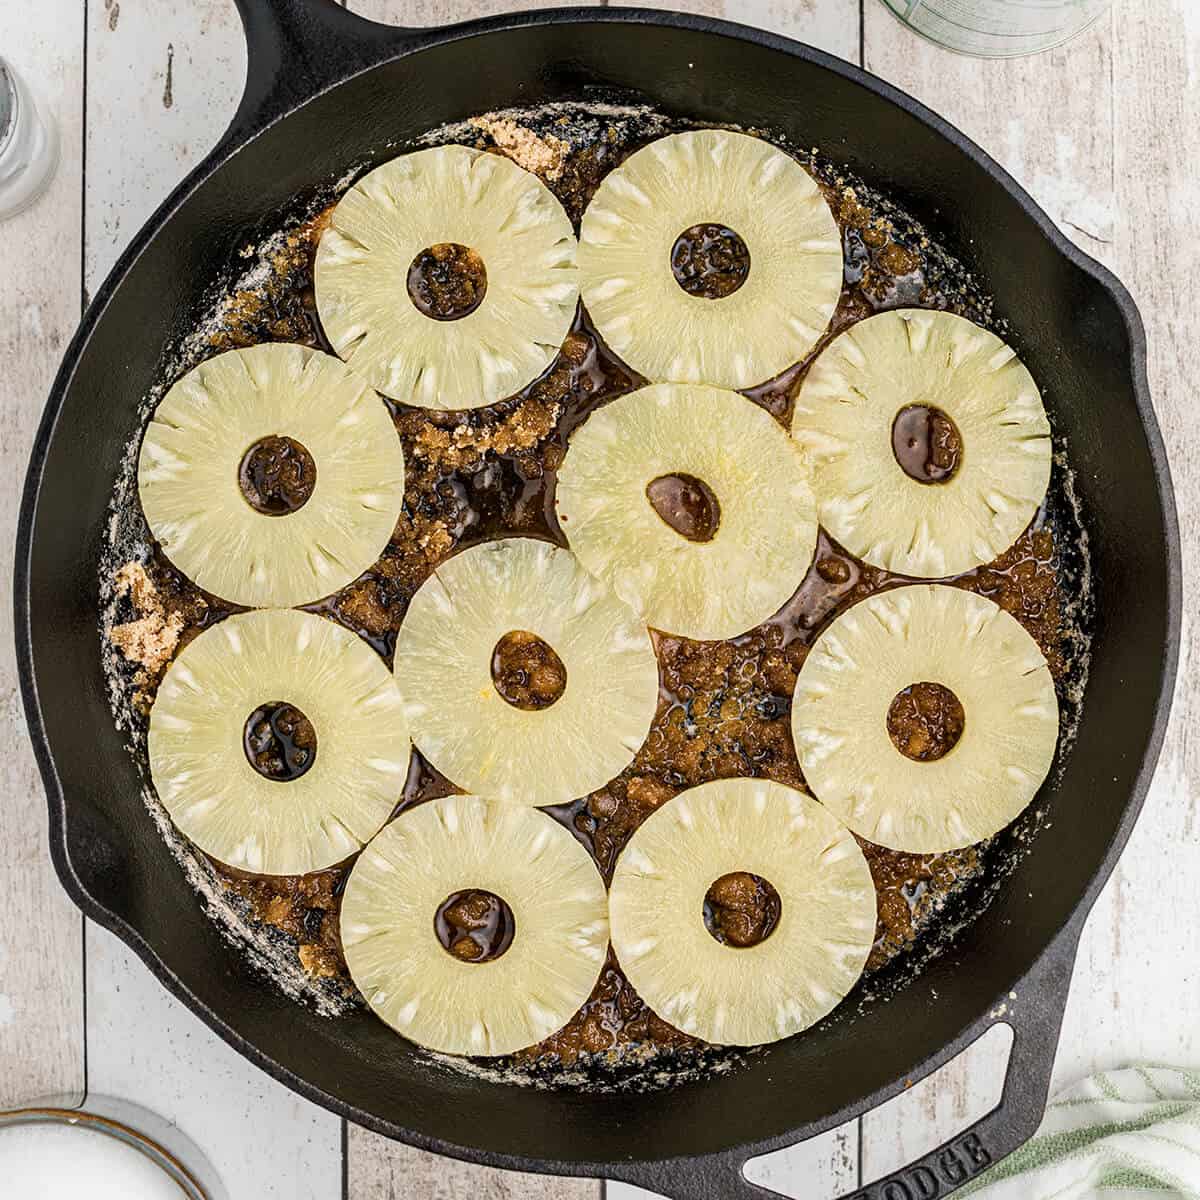 Pineapple slices placed over brown sugar and butter in a cast iron skillet.